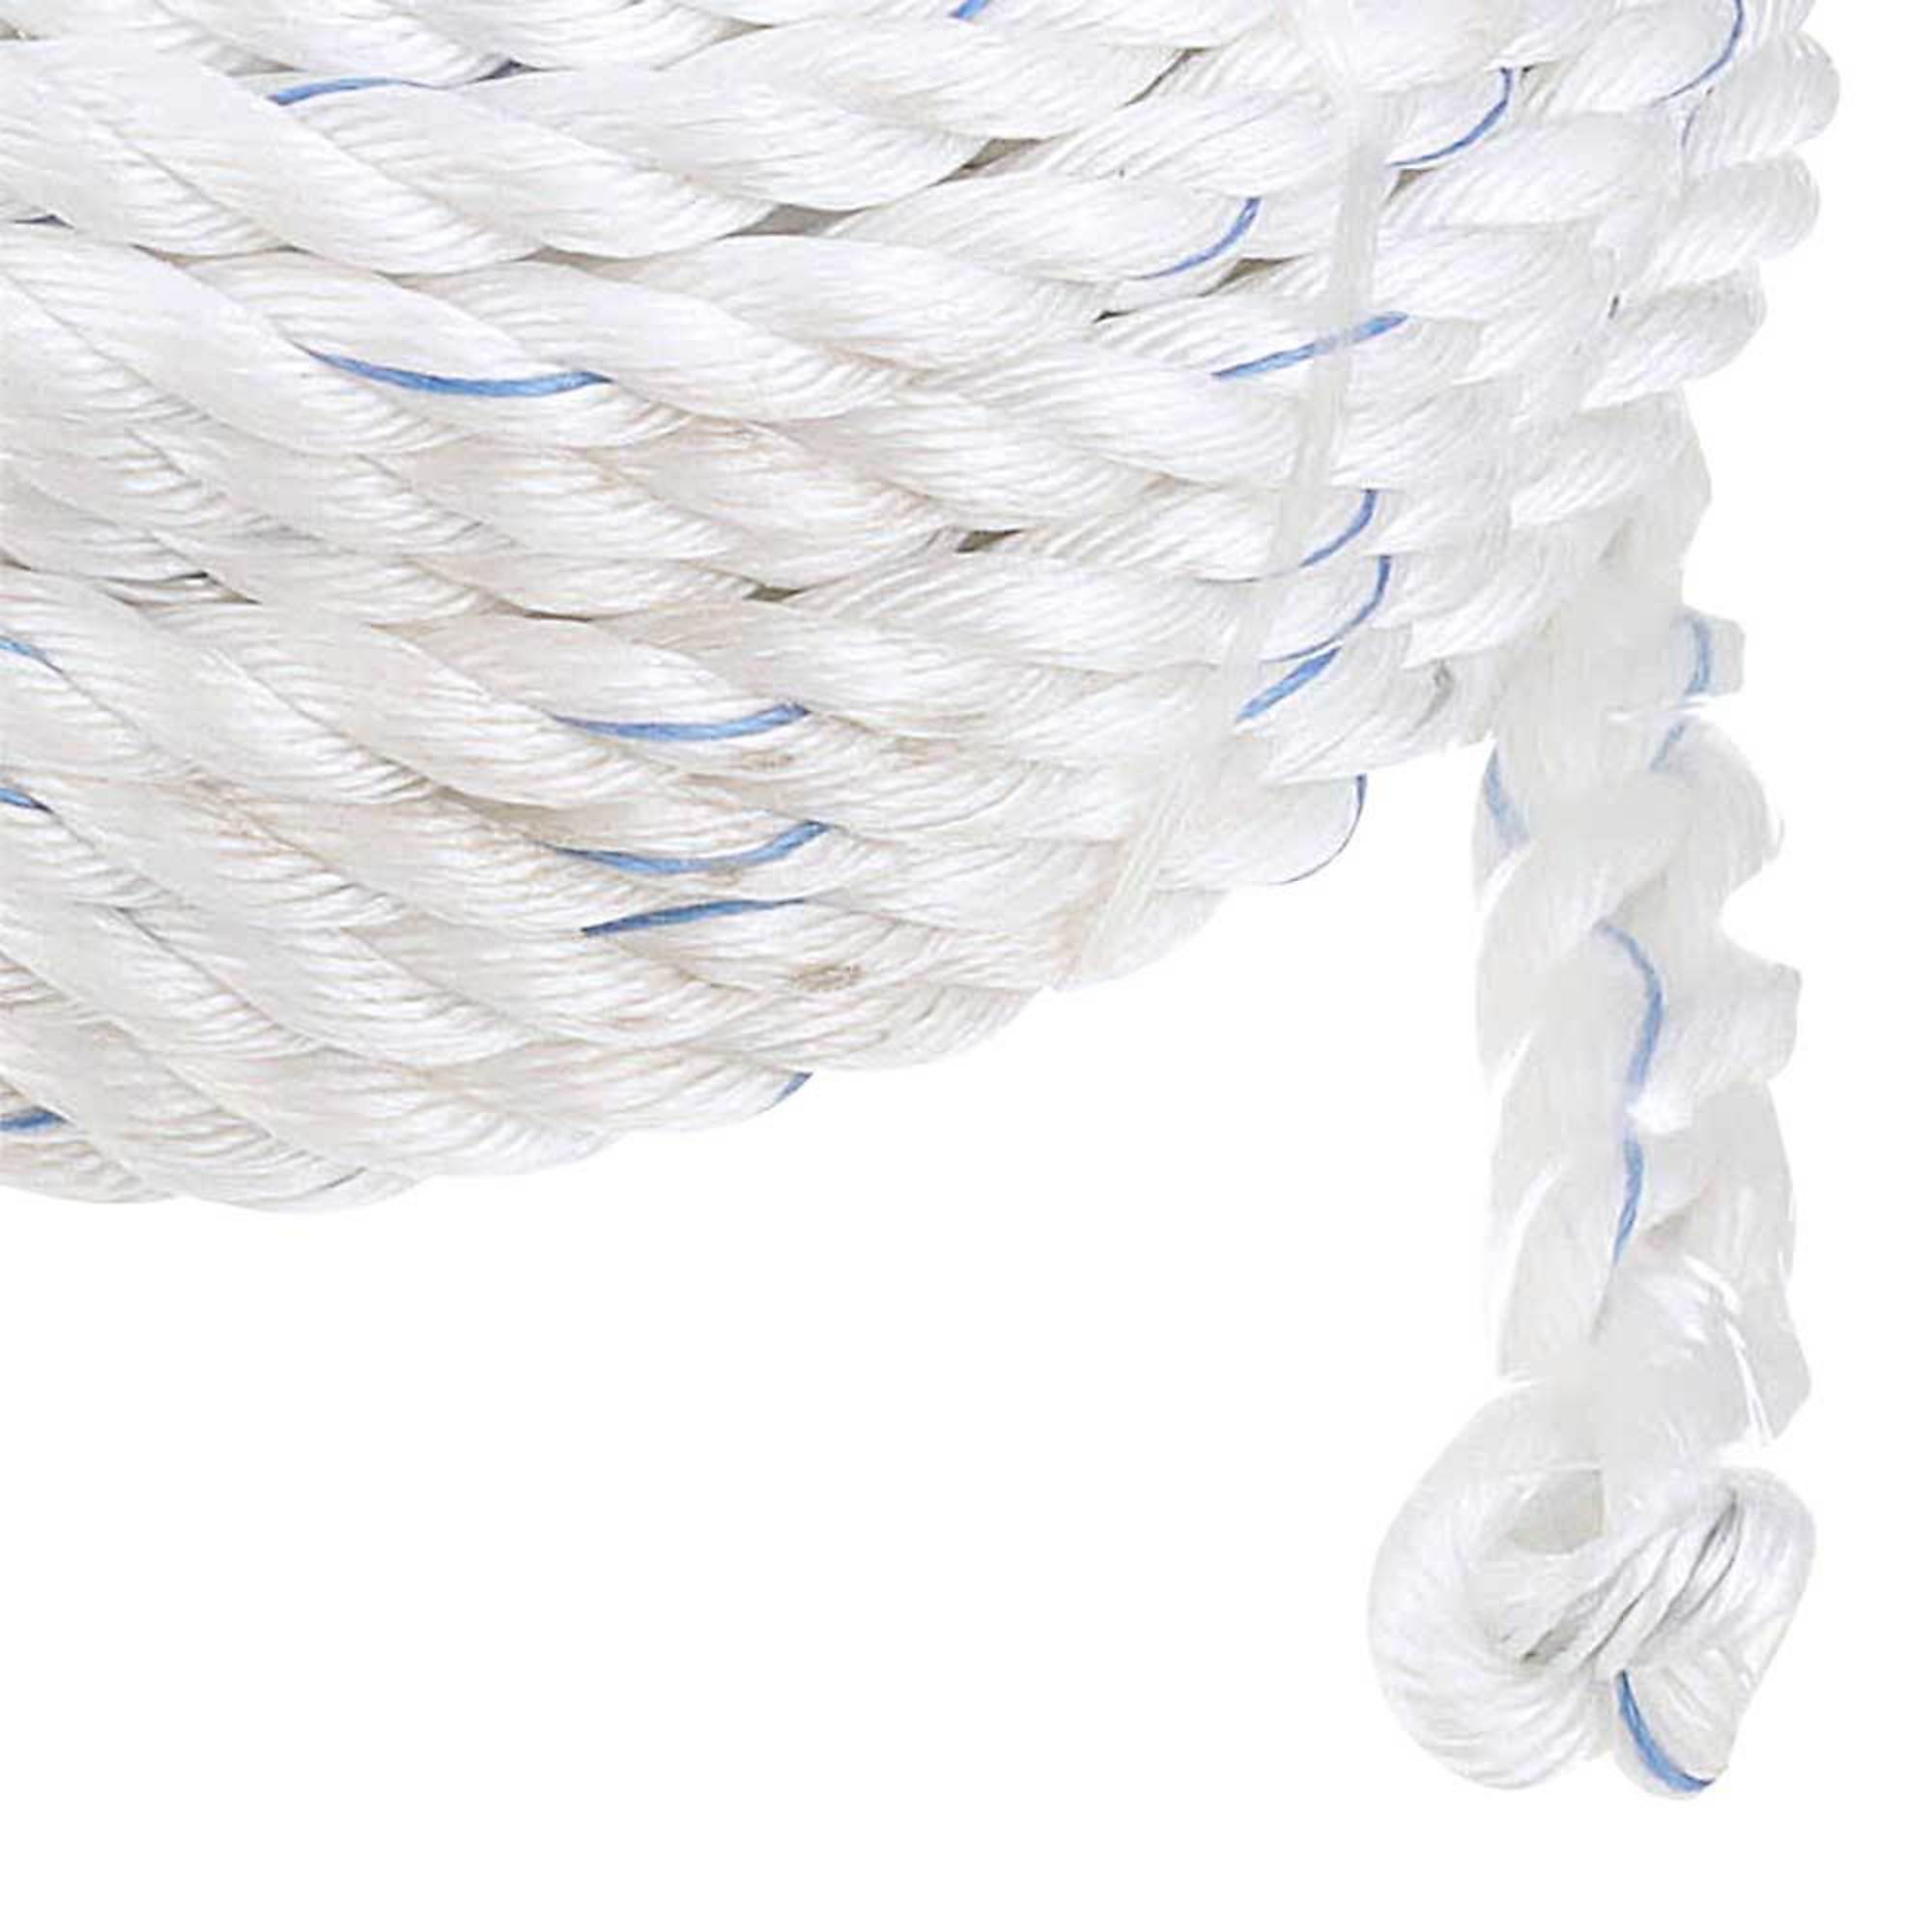 Peak Works, Lifeline Rope Grab, 100ft. Vertical Cable, Weight Capacity 6000  lb, Harness Size One Size, Model# V84084100